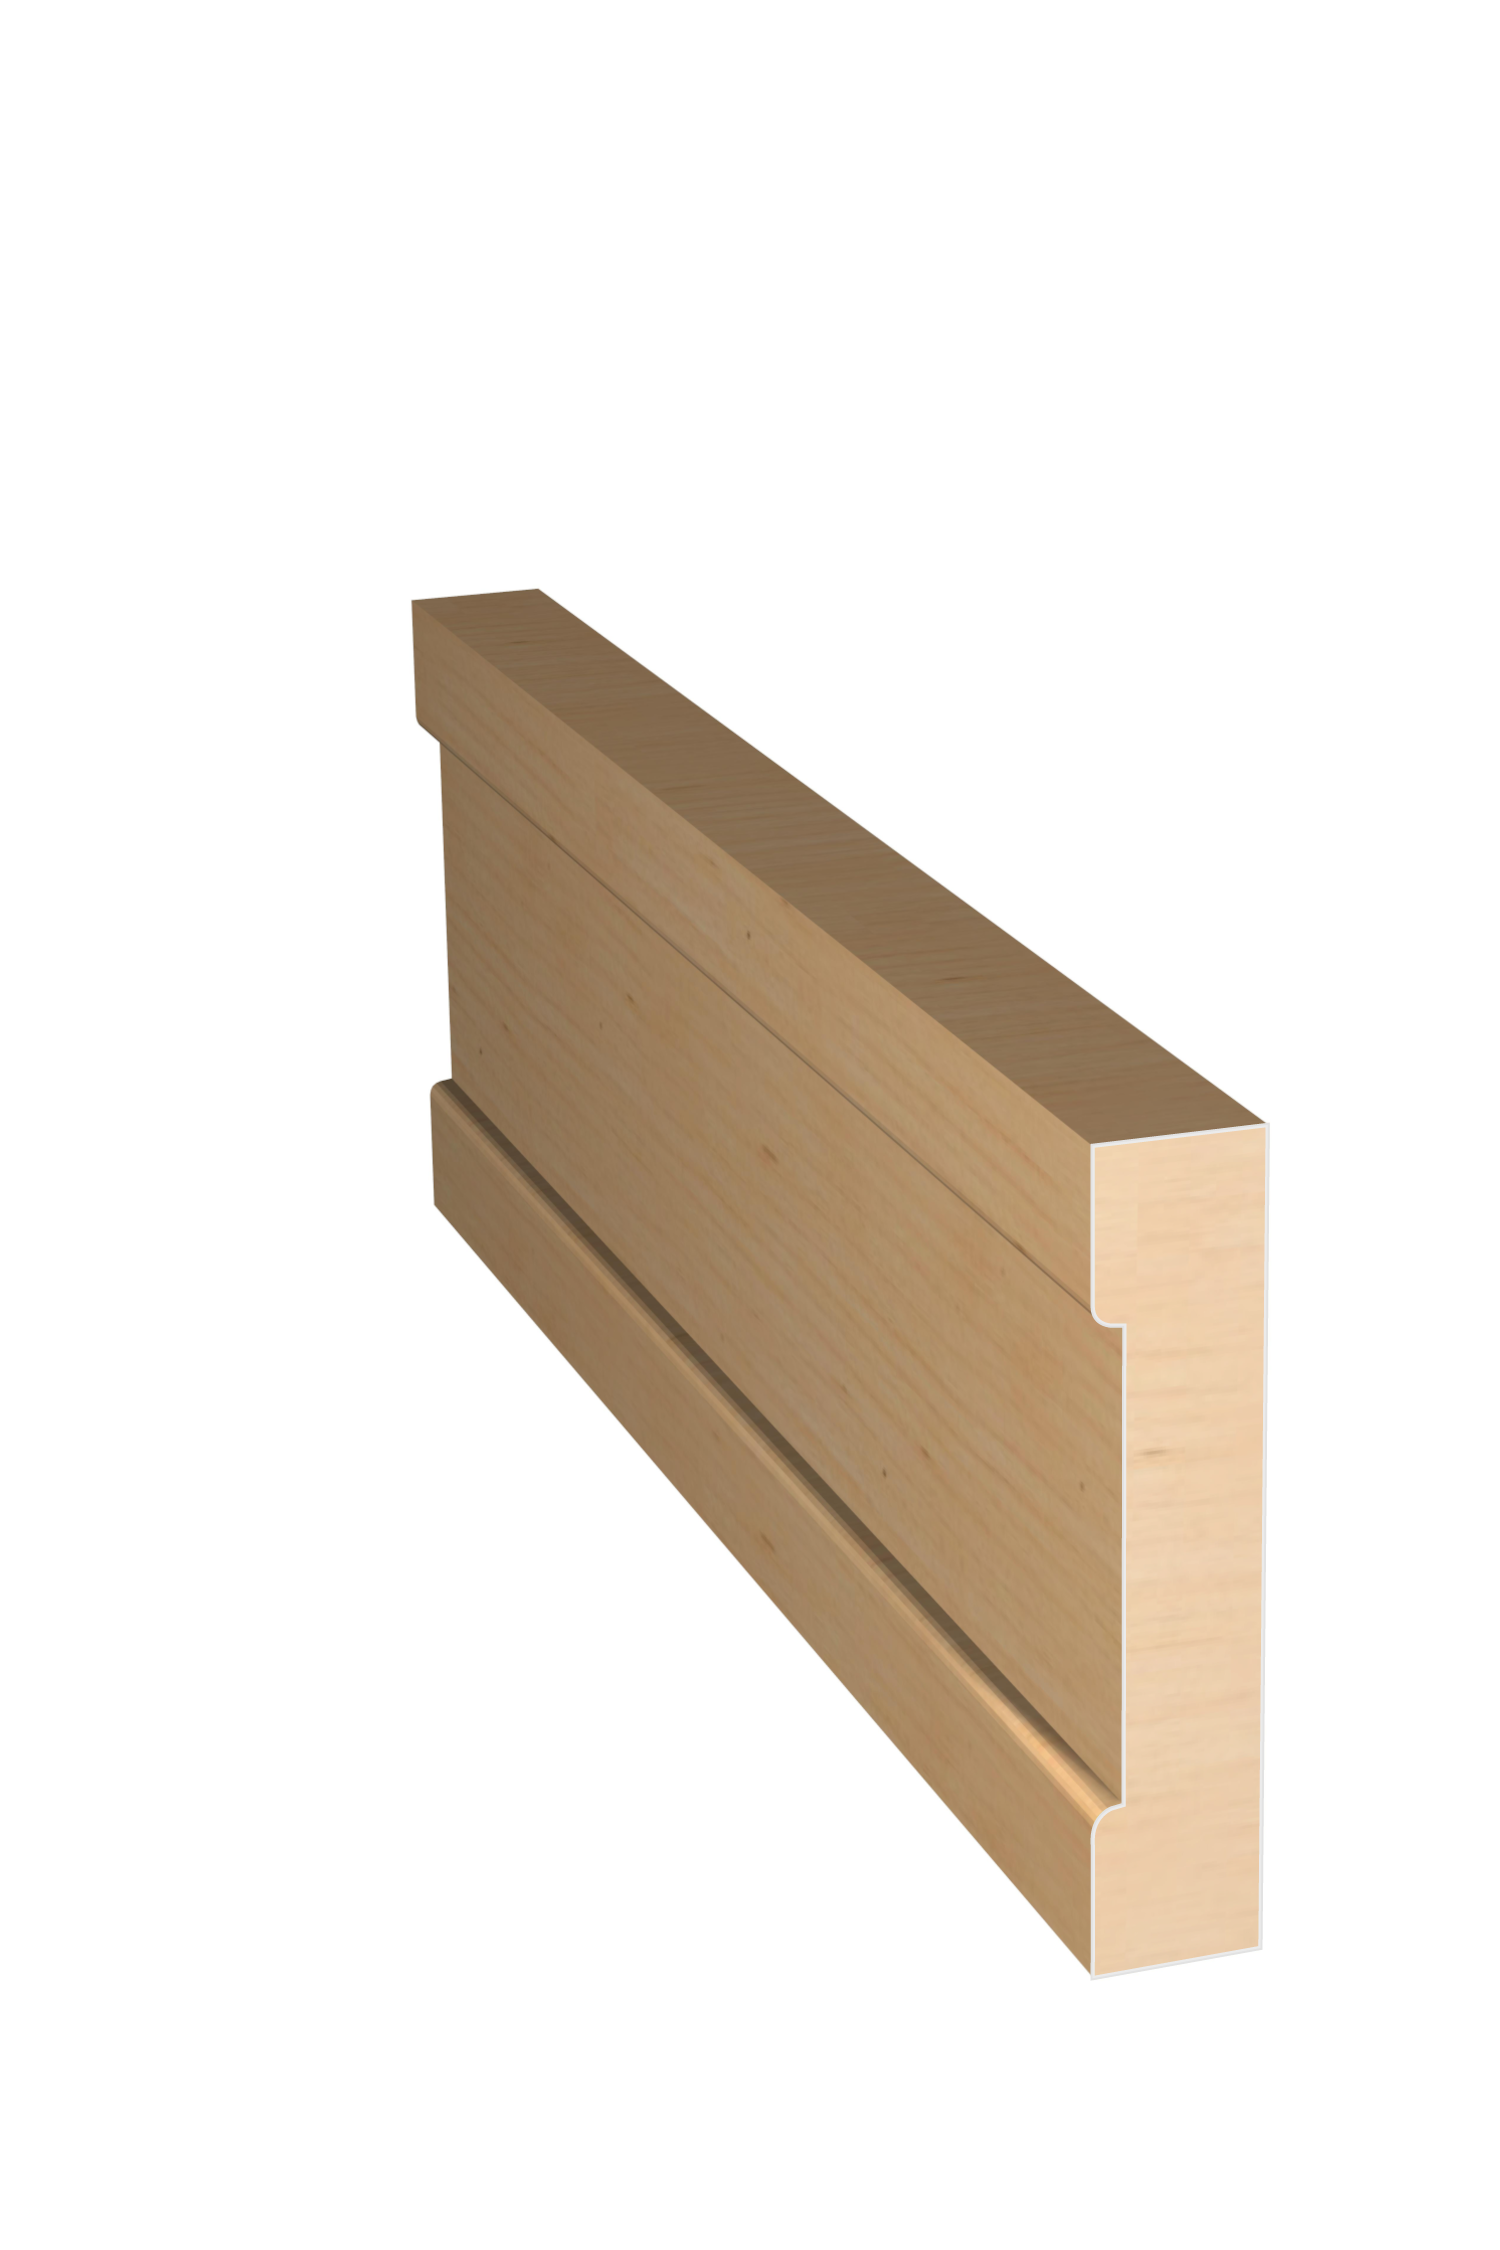 Three dimensional rendering of custom casing wood molding CAPL2182 made by Public Lumber Company in Detroit.